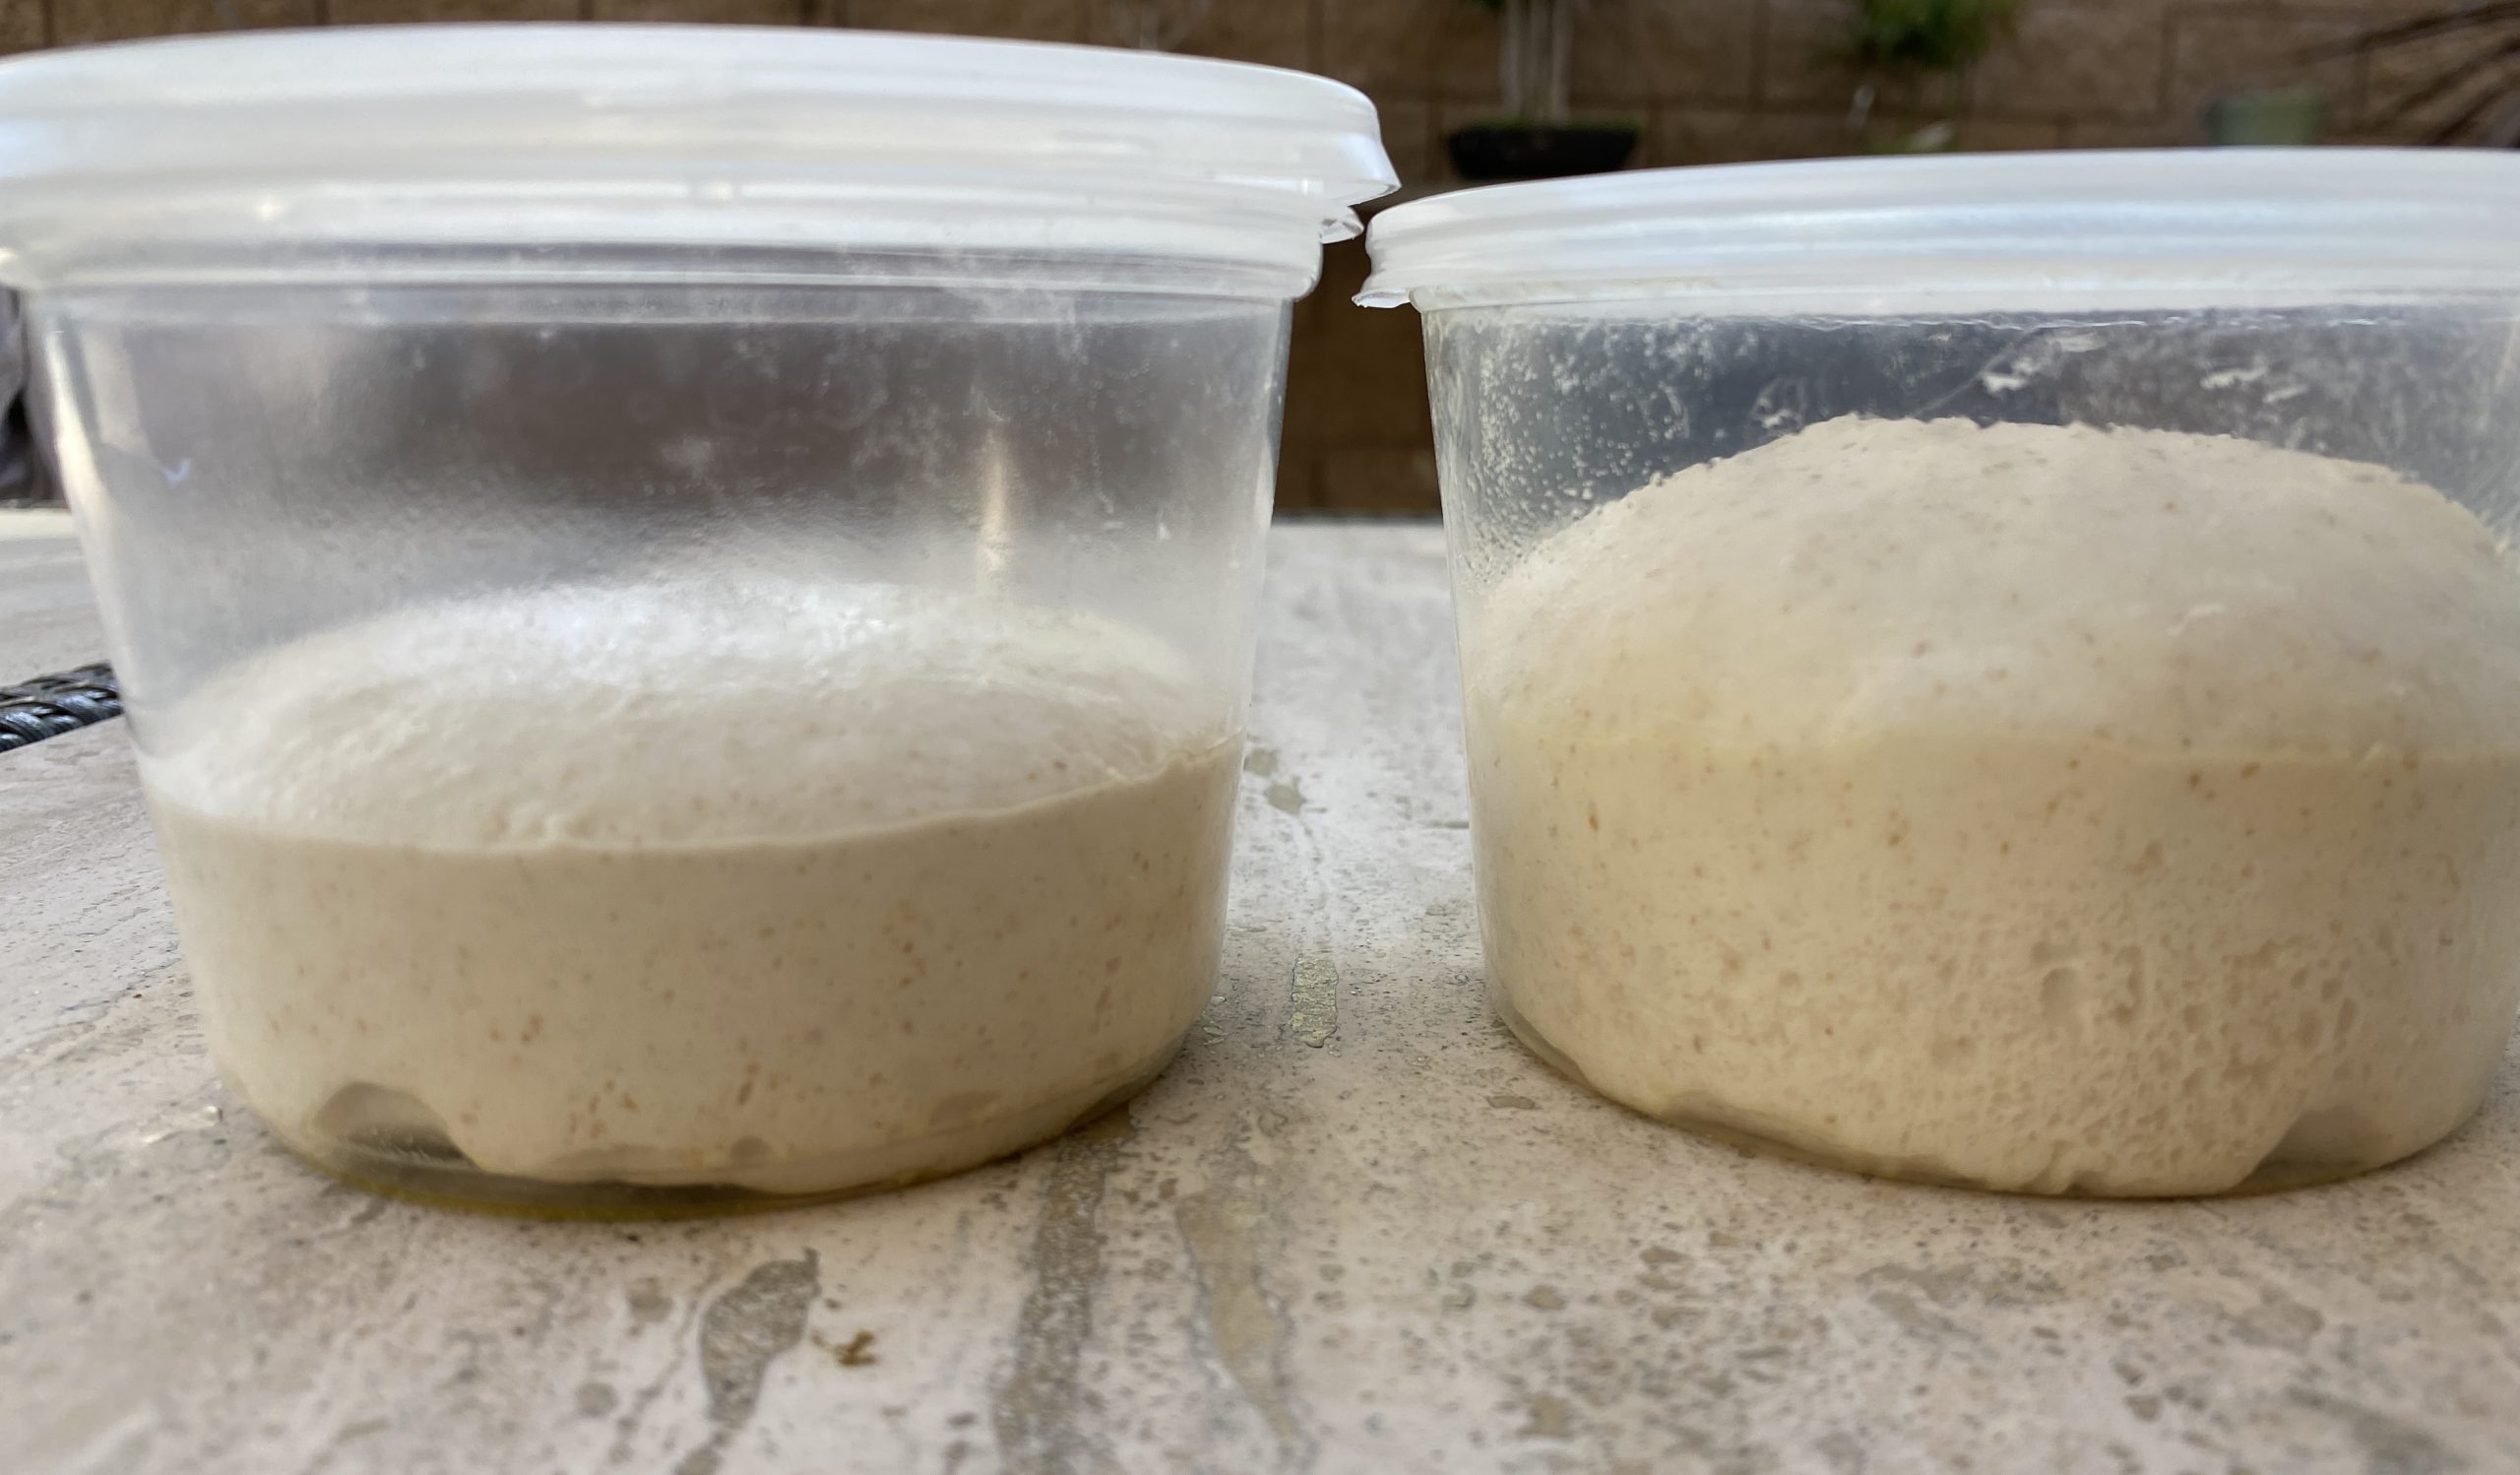 Dough made by hand vs. dough made by machine